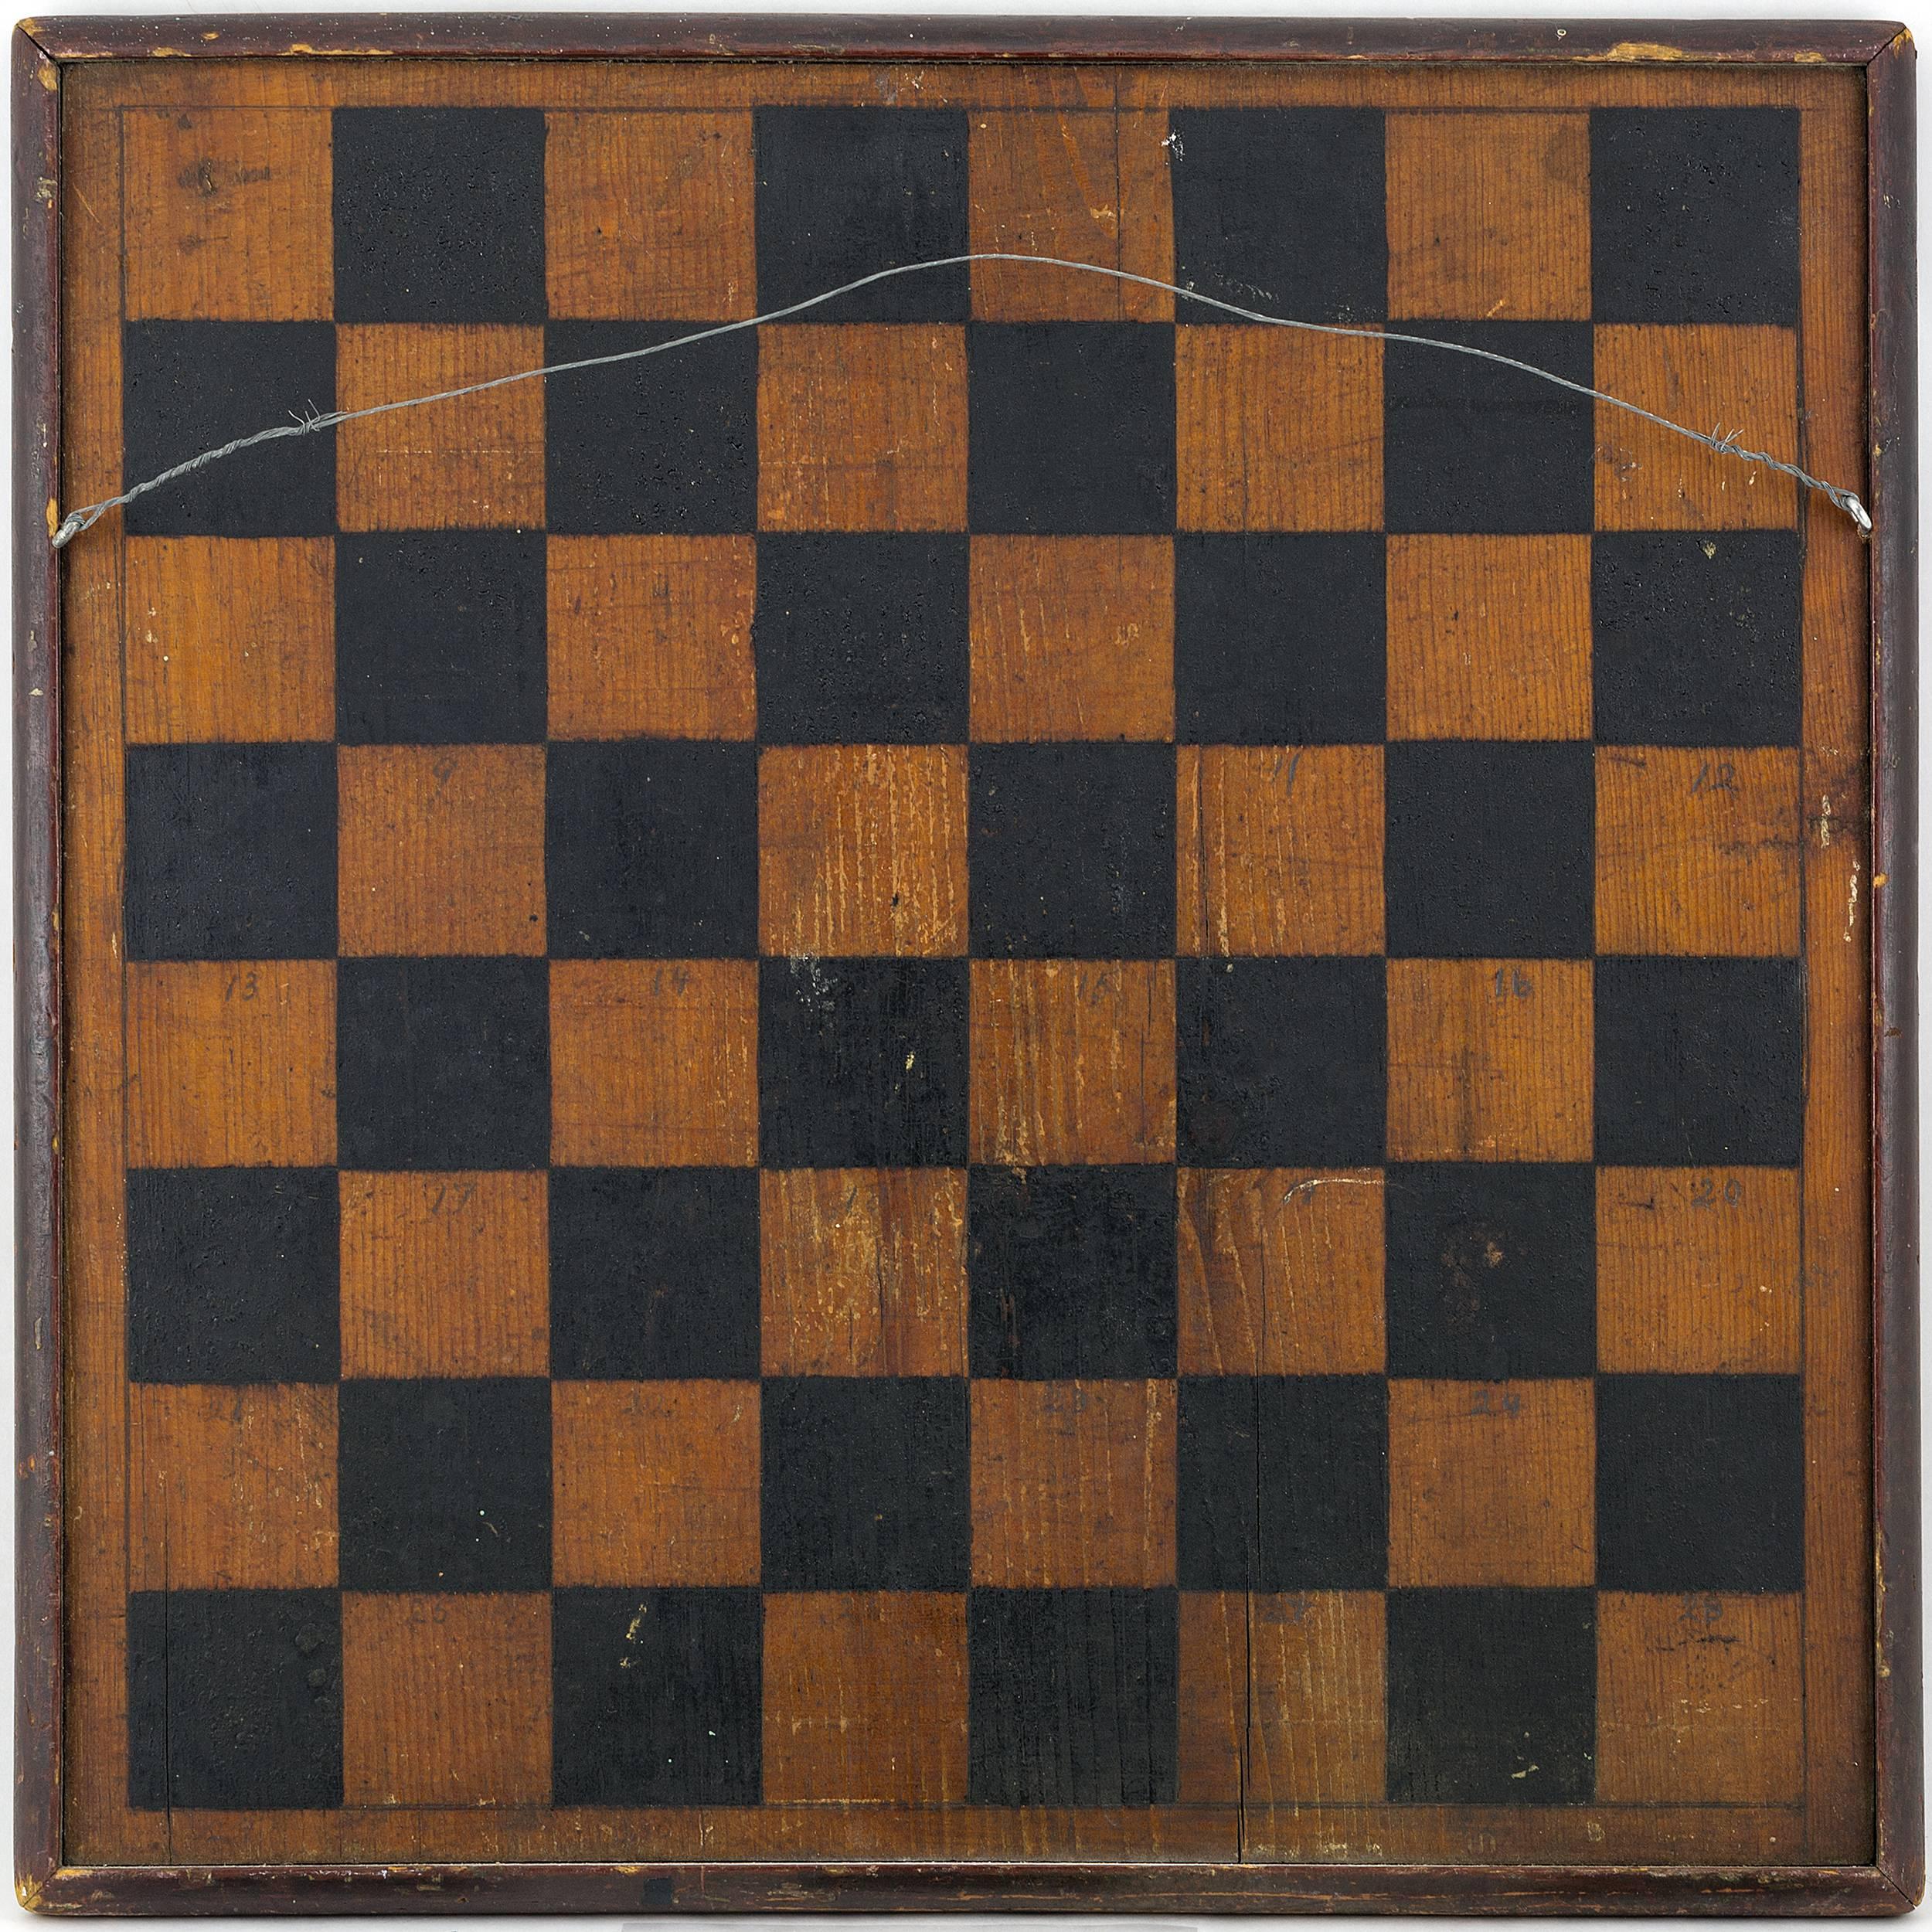 The Parcheesi side has multicolored painted pinwheel corners with mother-of-pearl inlay at the home space, the checker side has black painted checks
Made of a solid piece of white pine with a painted molded edge.